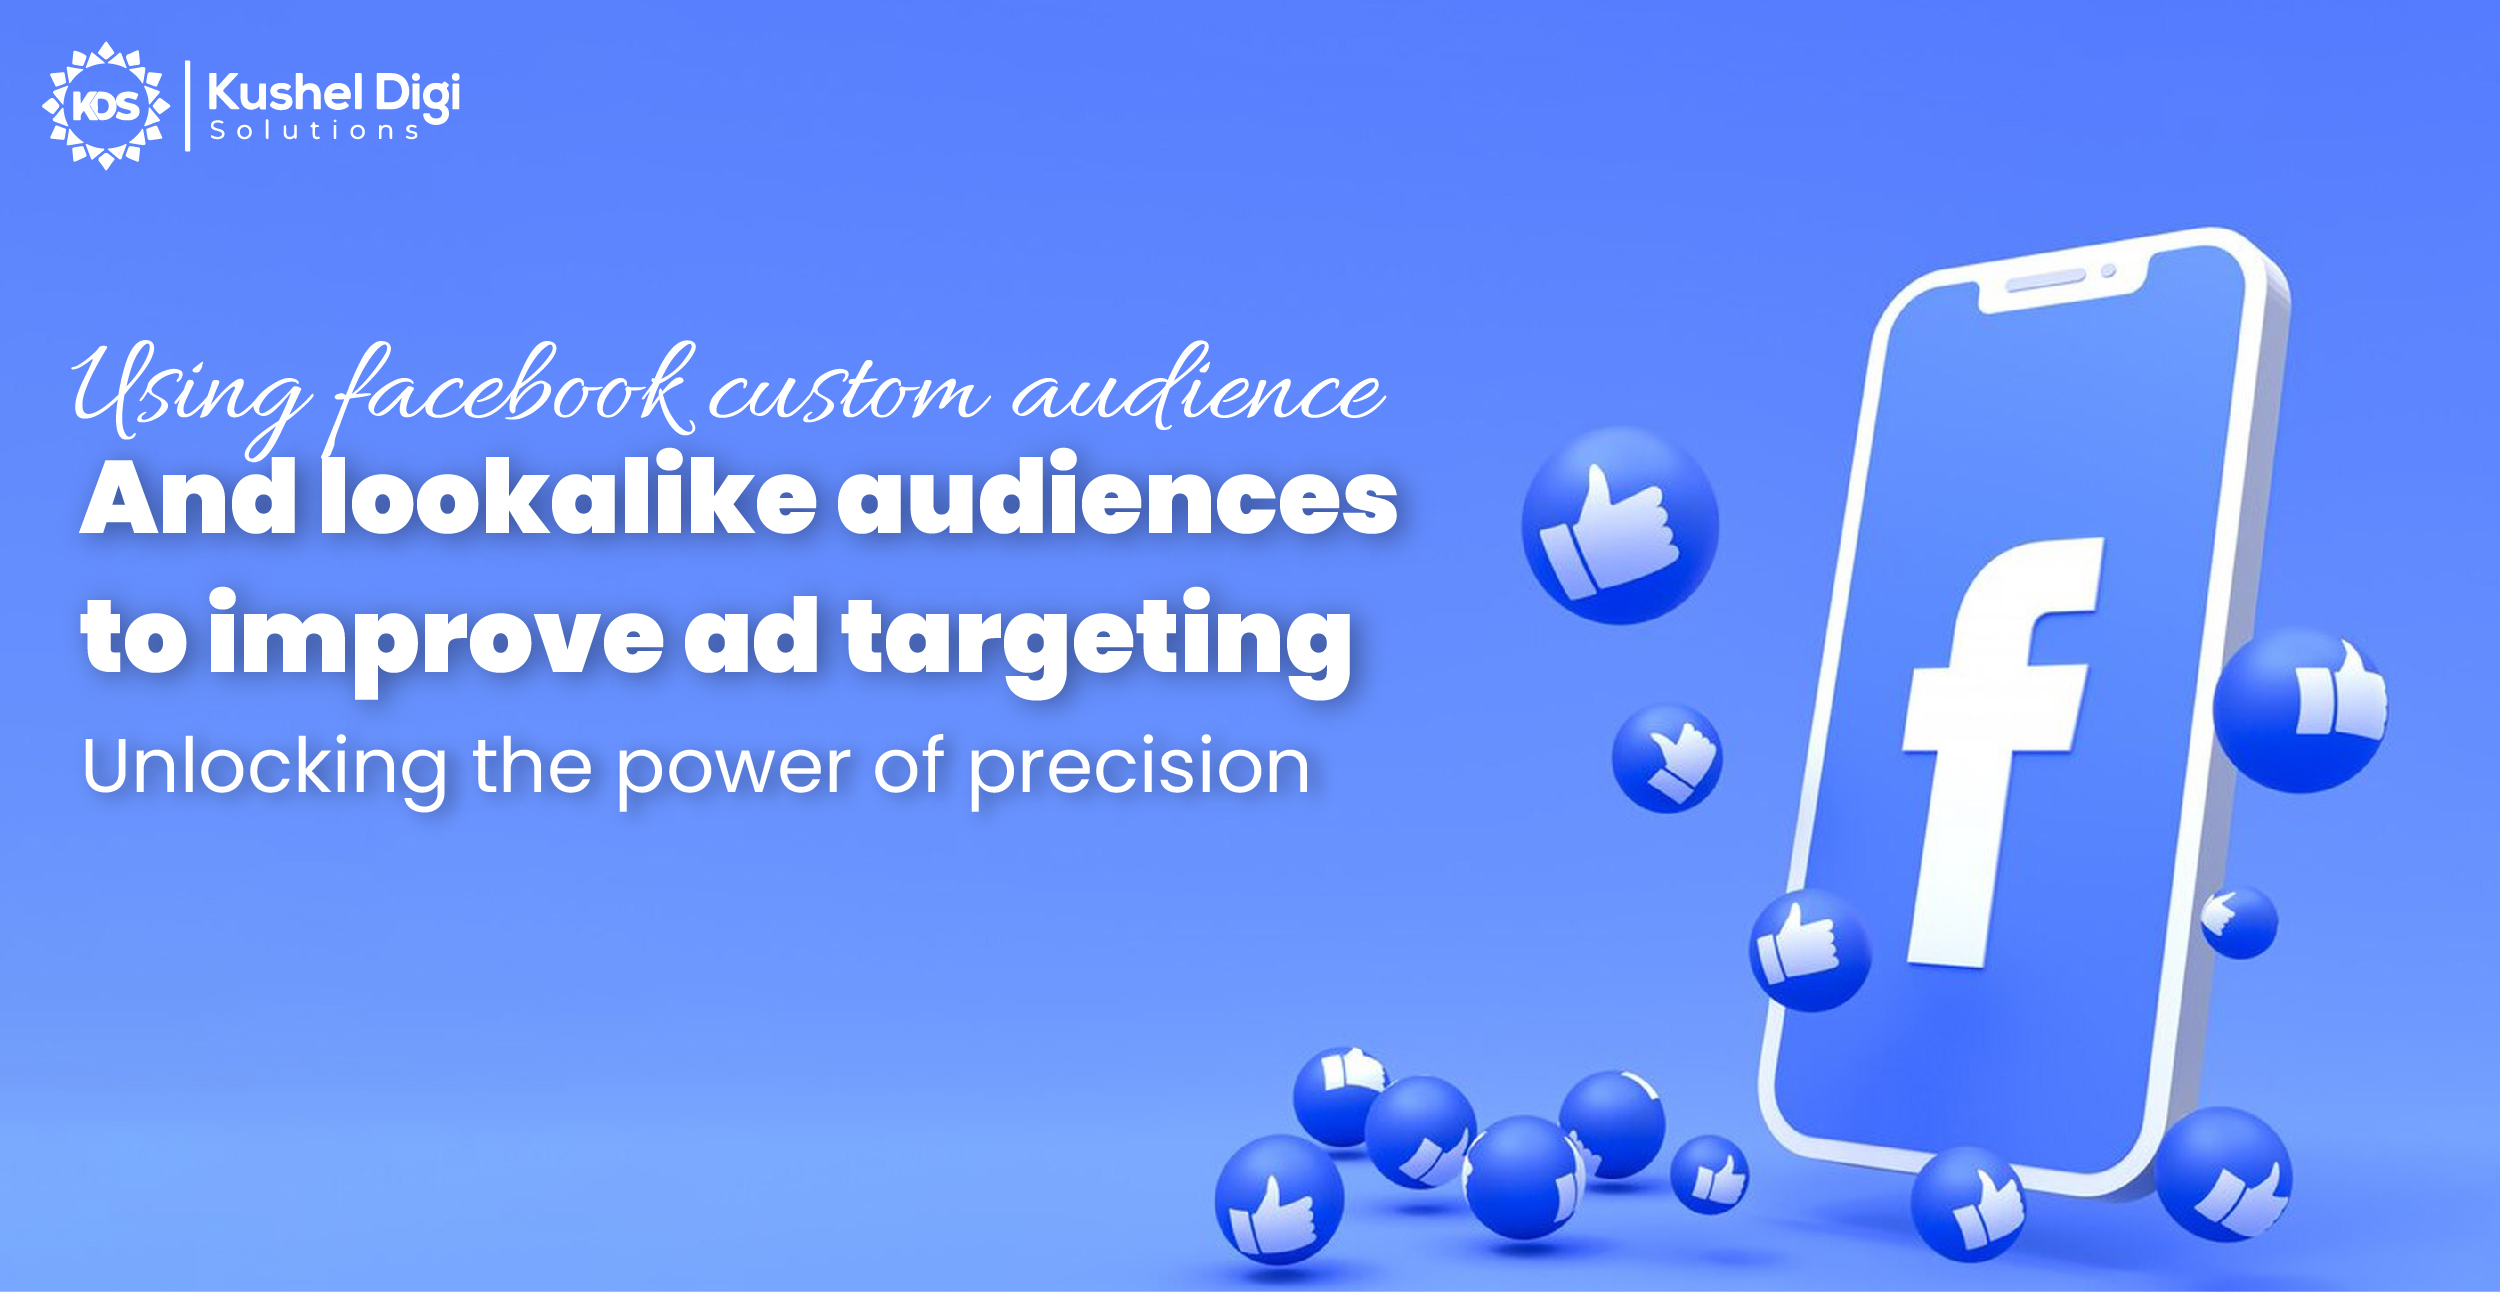 USING FACEBOOK CUSTOM AUDIENCE AND LOOKALIKE AUDIENCES TO IMPROVE AD TARGETING: UNLOCKING THE POWER OF PRECISION